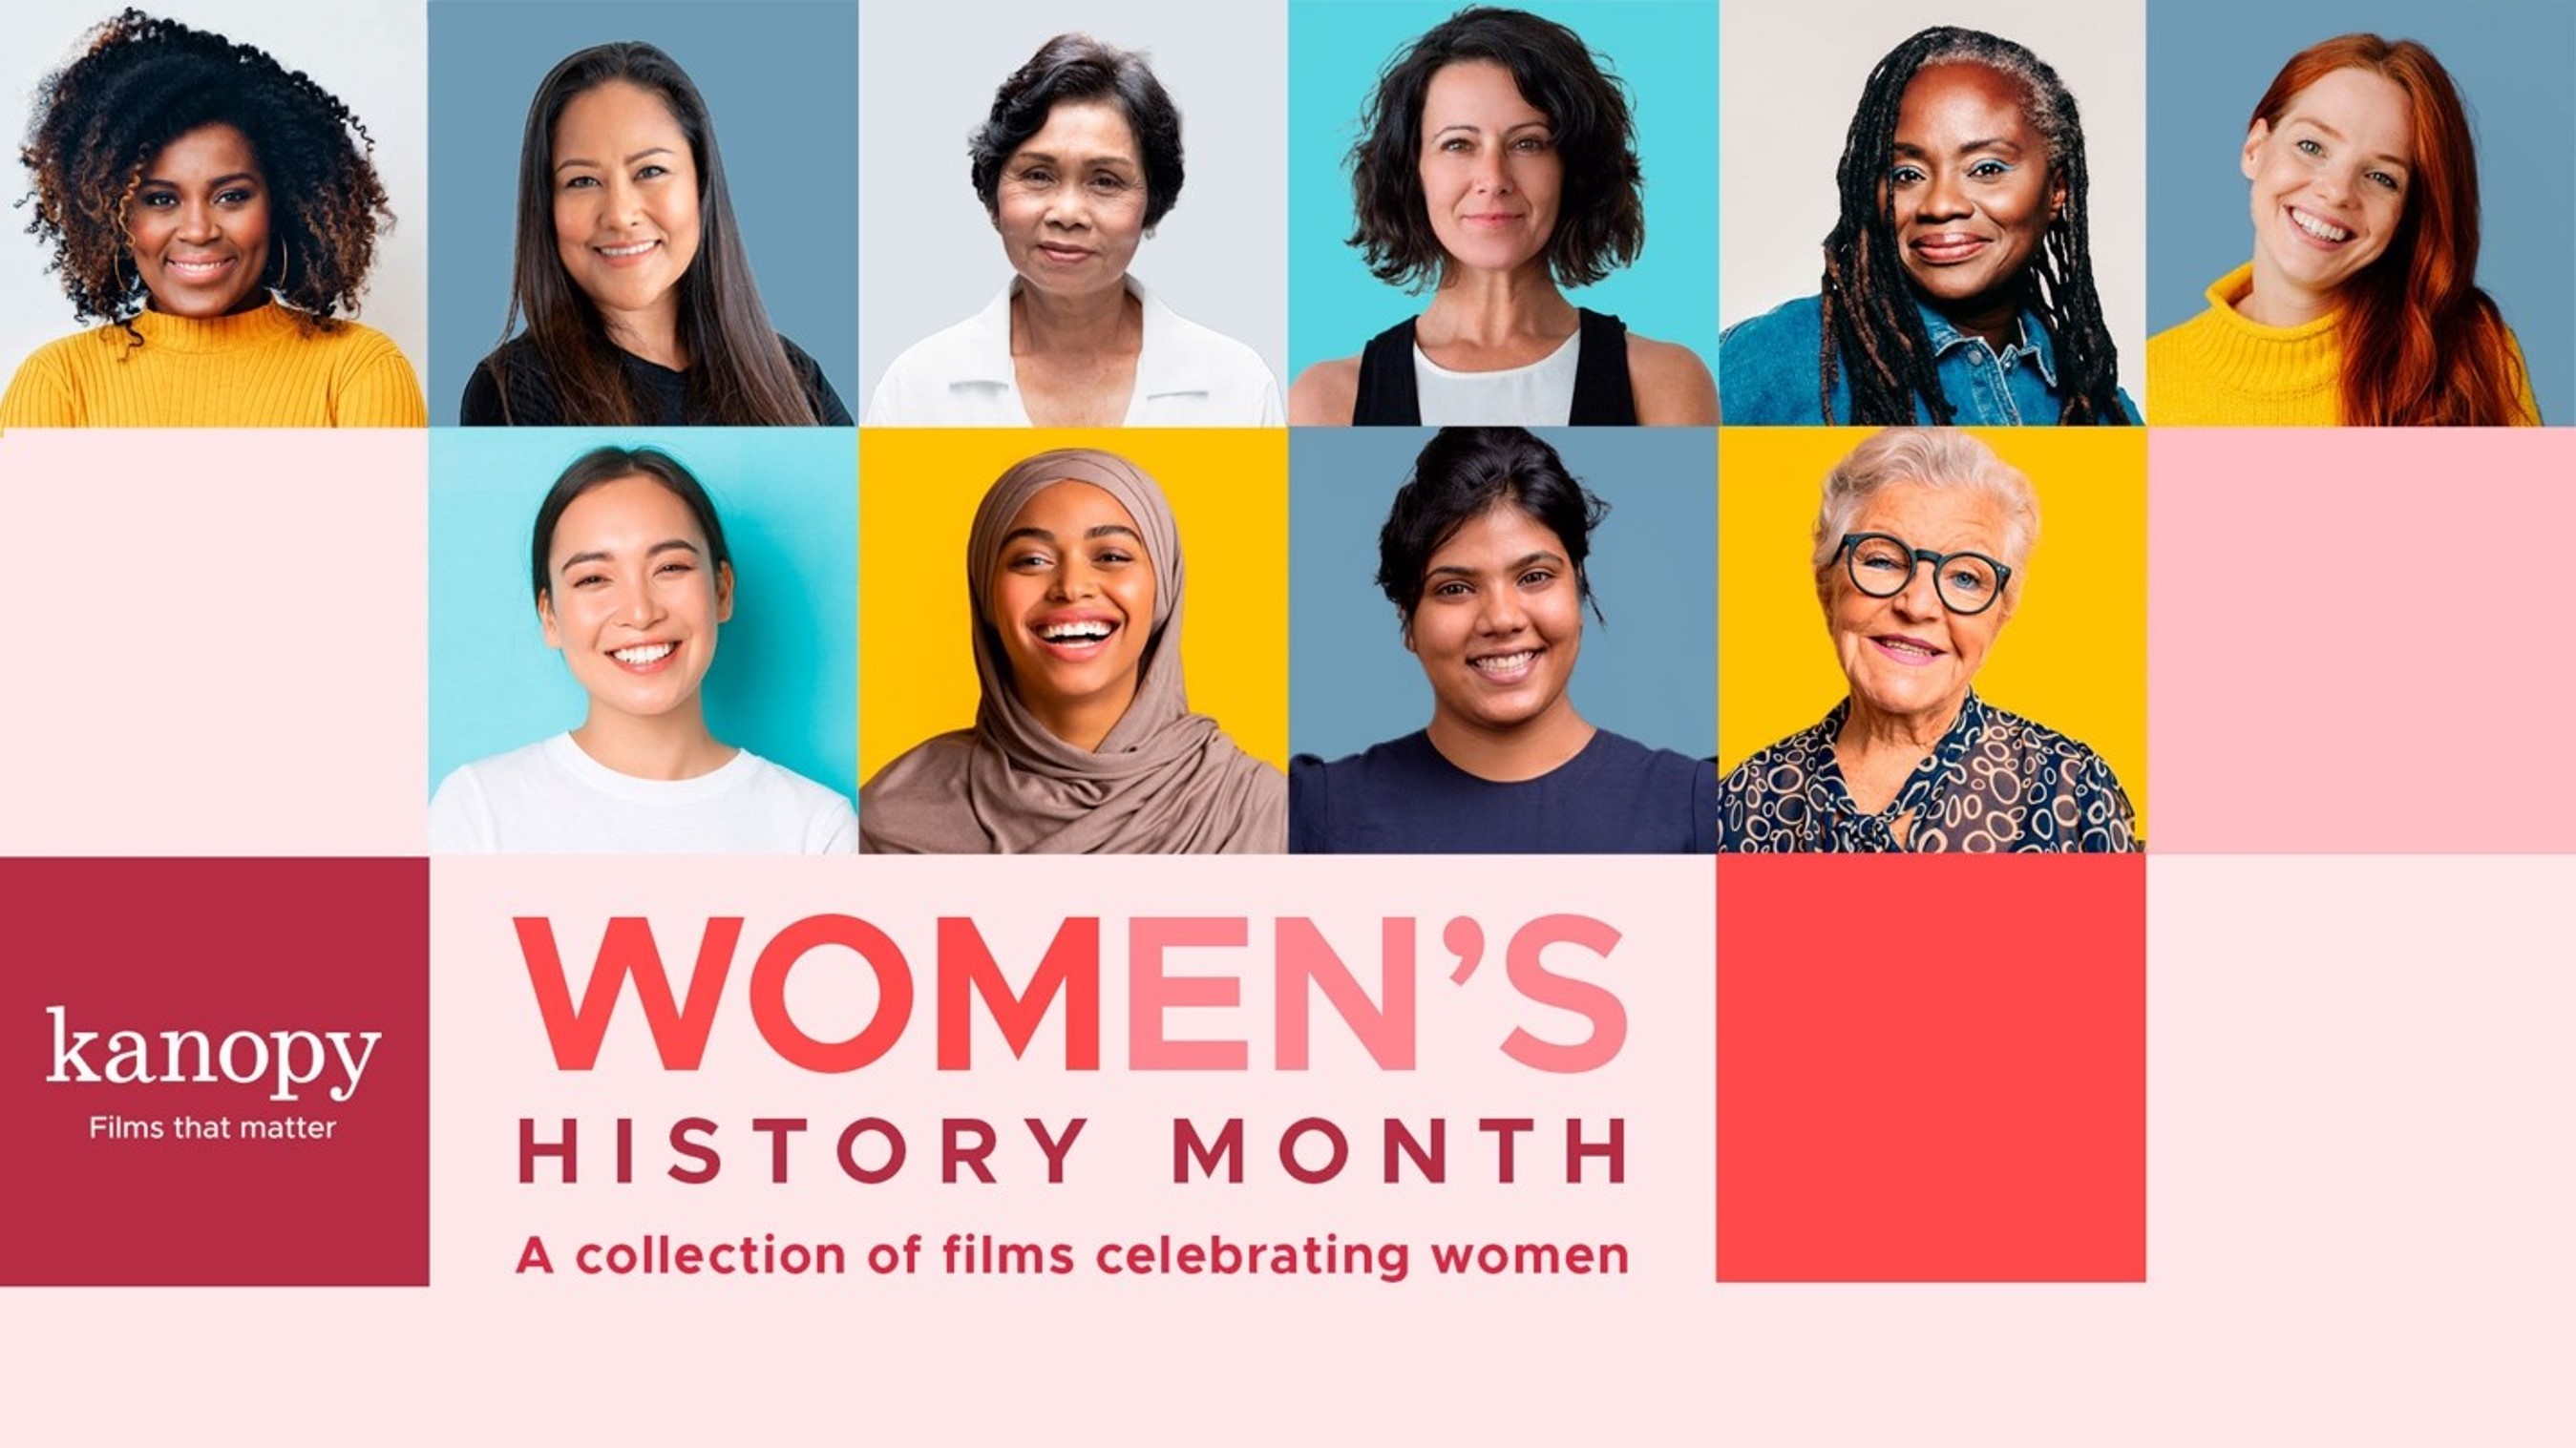 This women's history month, Kanopy has selected titles aimed at showcasing the work of women filmmakers and films about women.